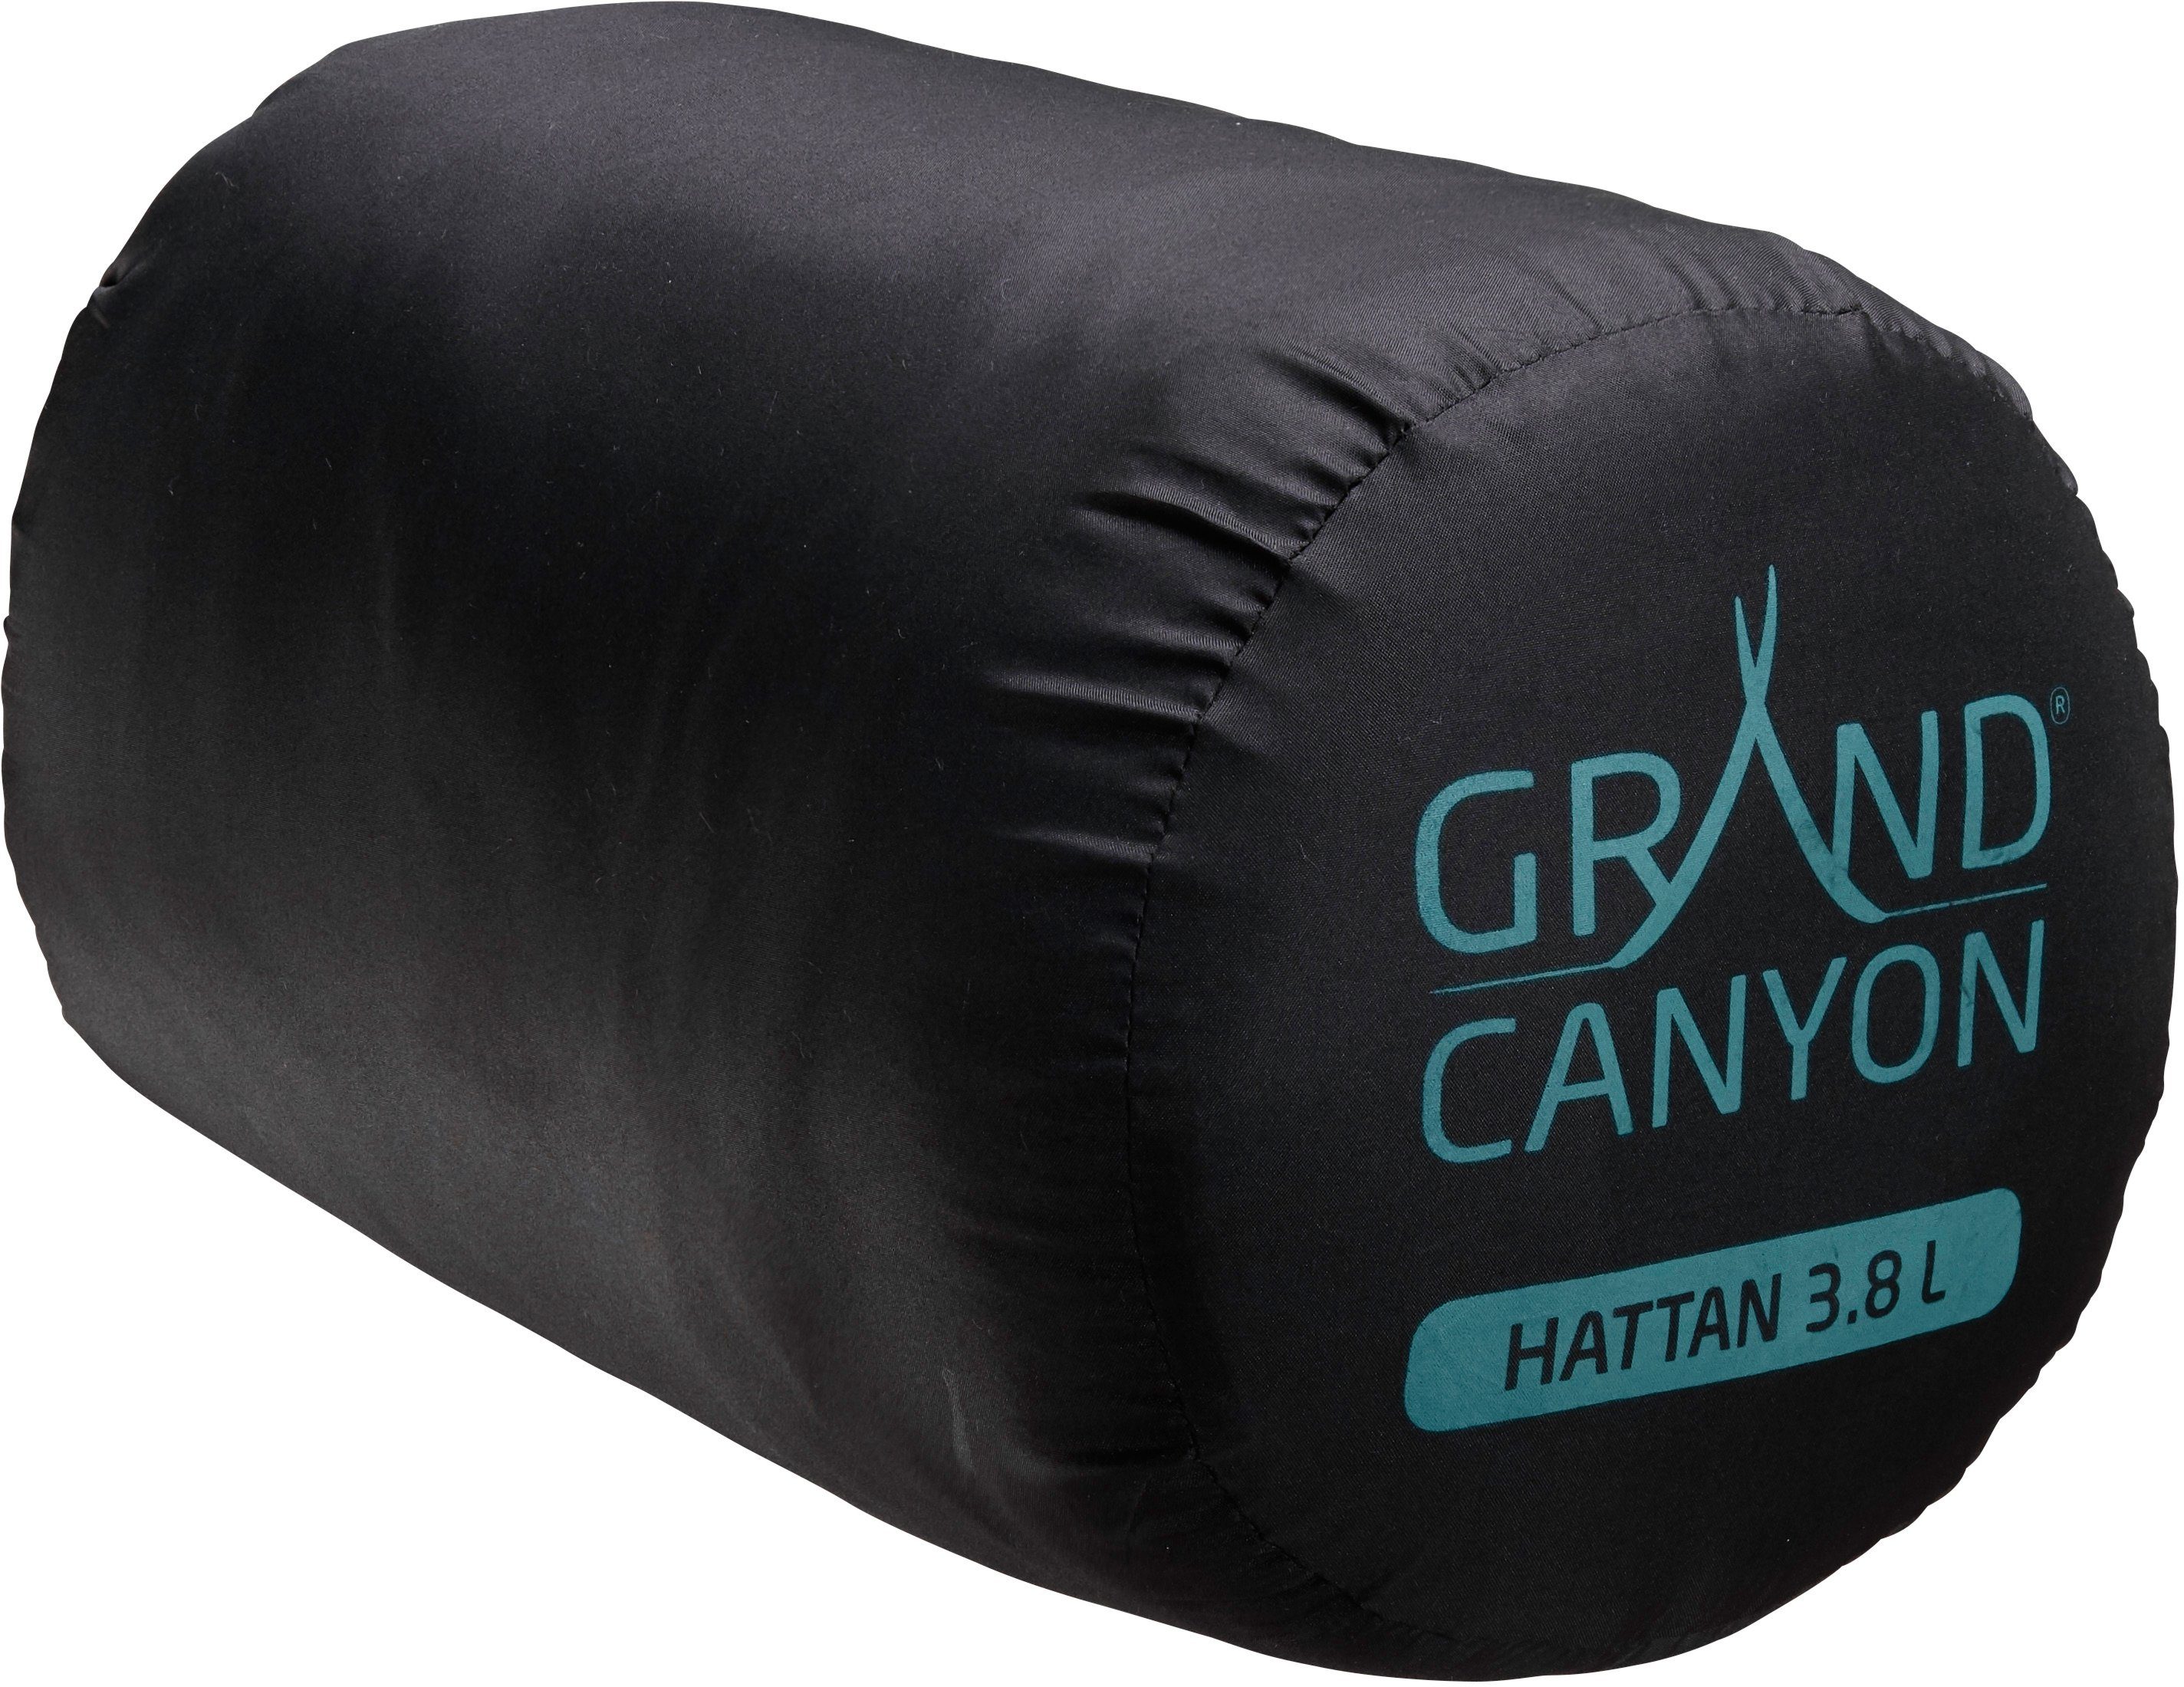 CANYON Isomatte Meadowbrook GRAND